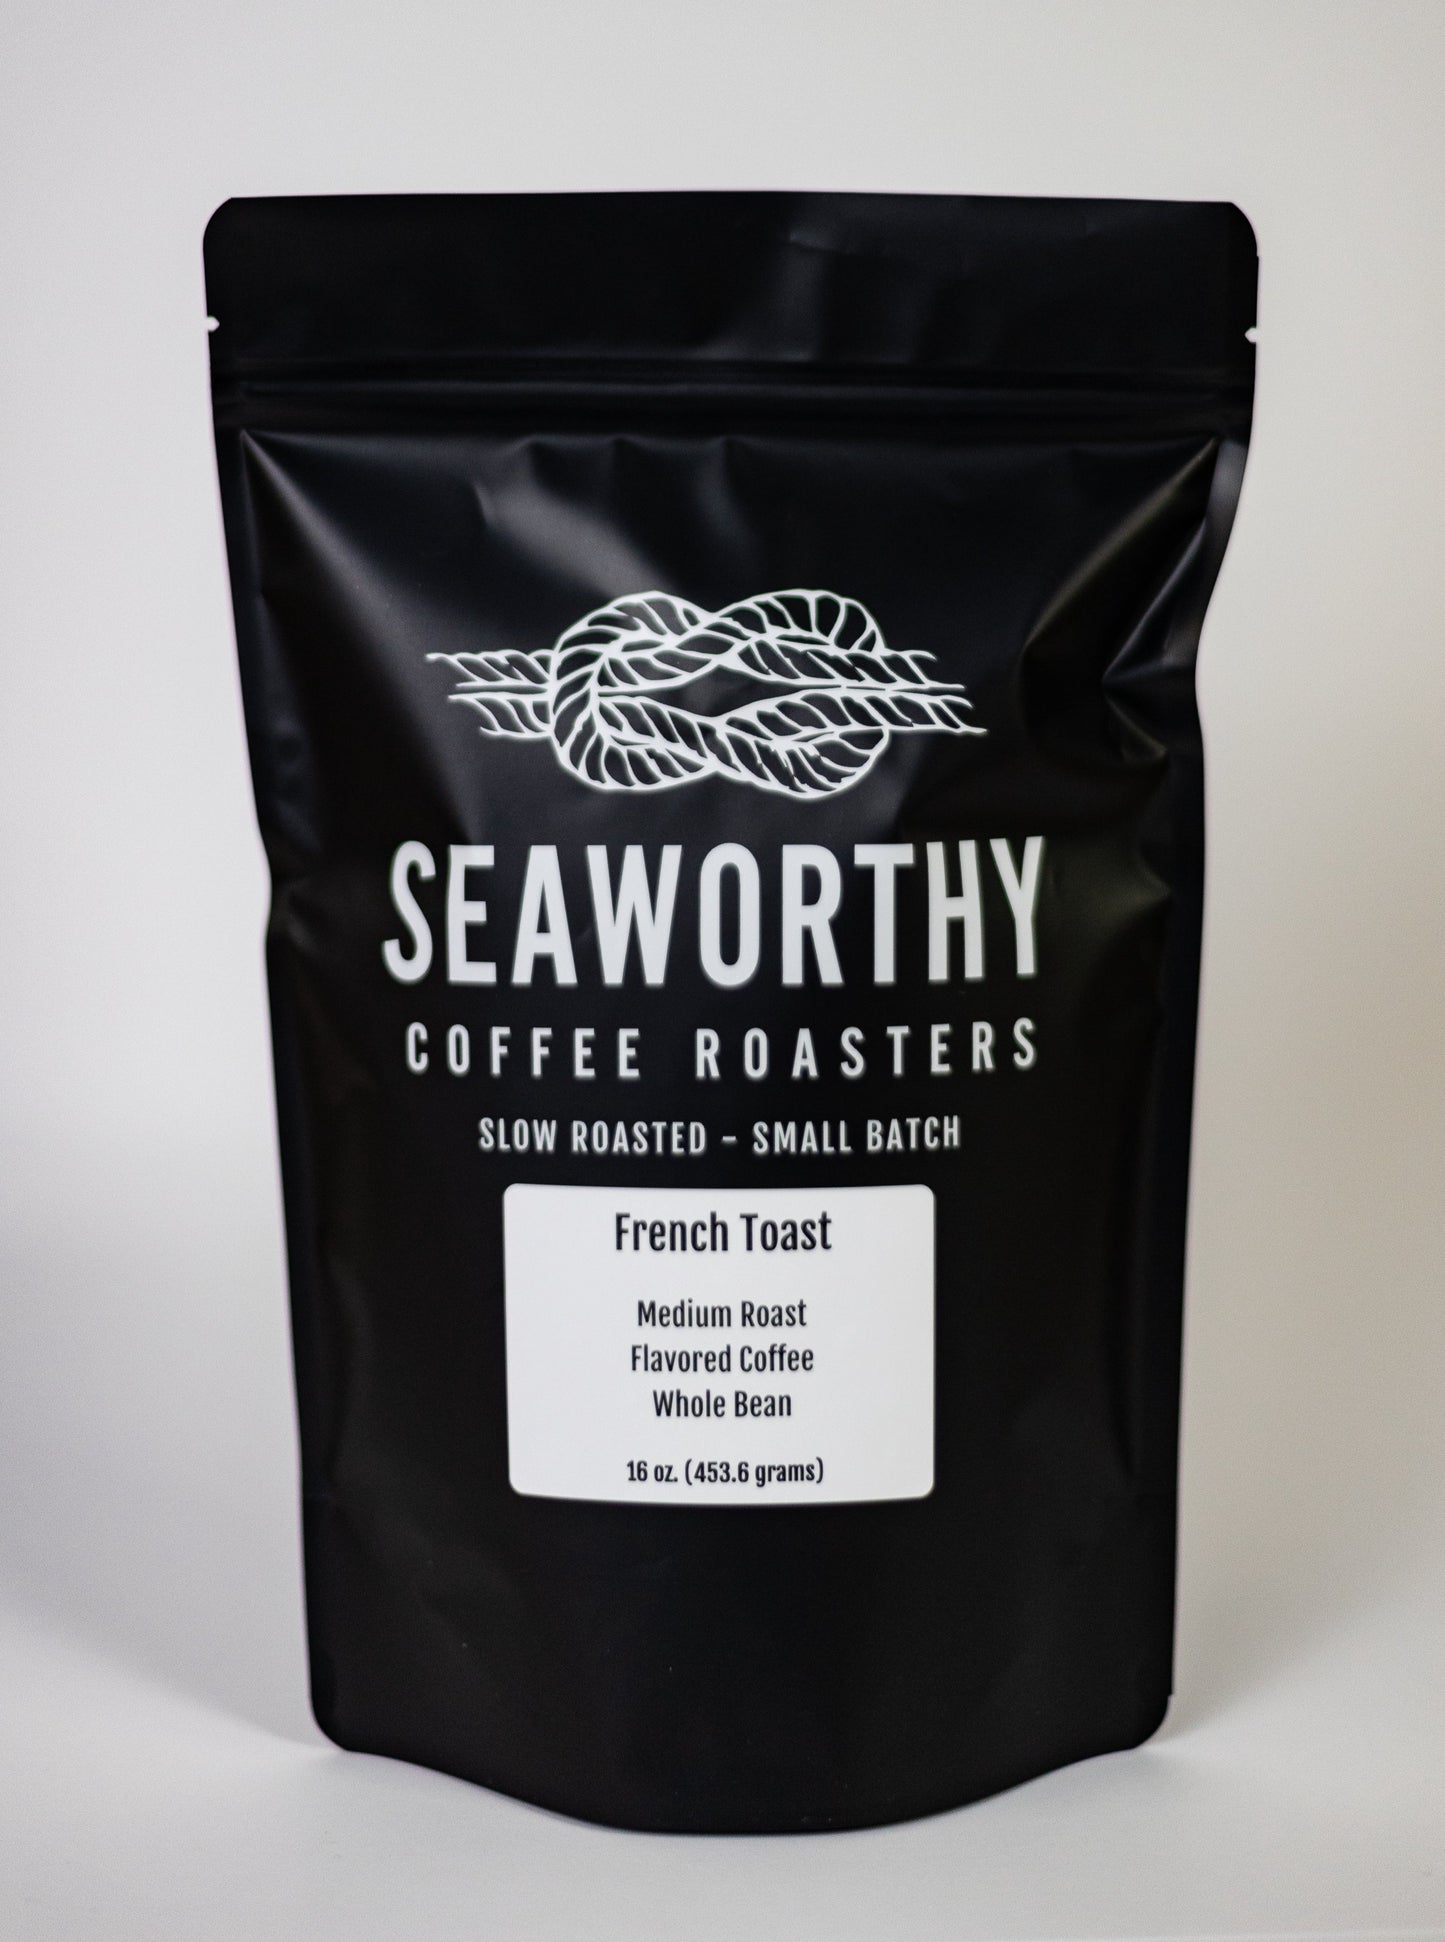 Seaworthy slow roasted, small batch, low acid coffee. 1 pound bag of French Toast flavored coffee.